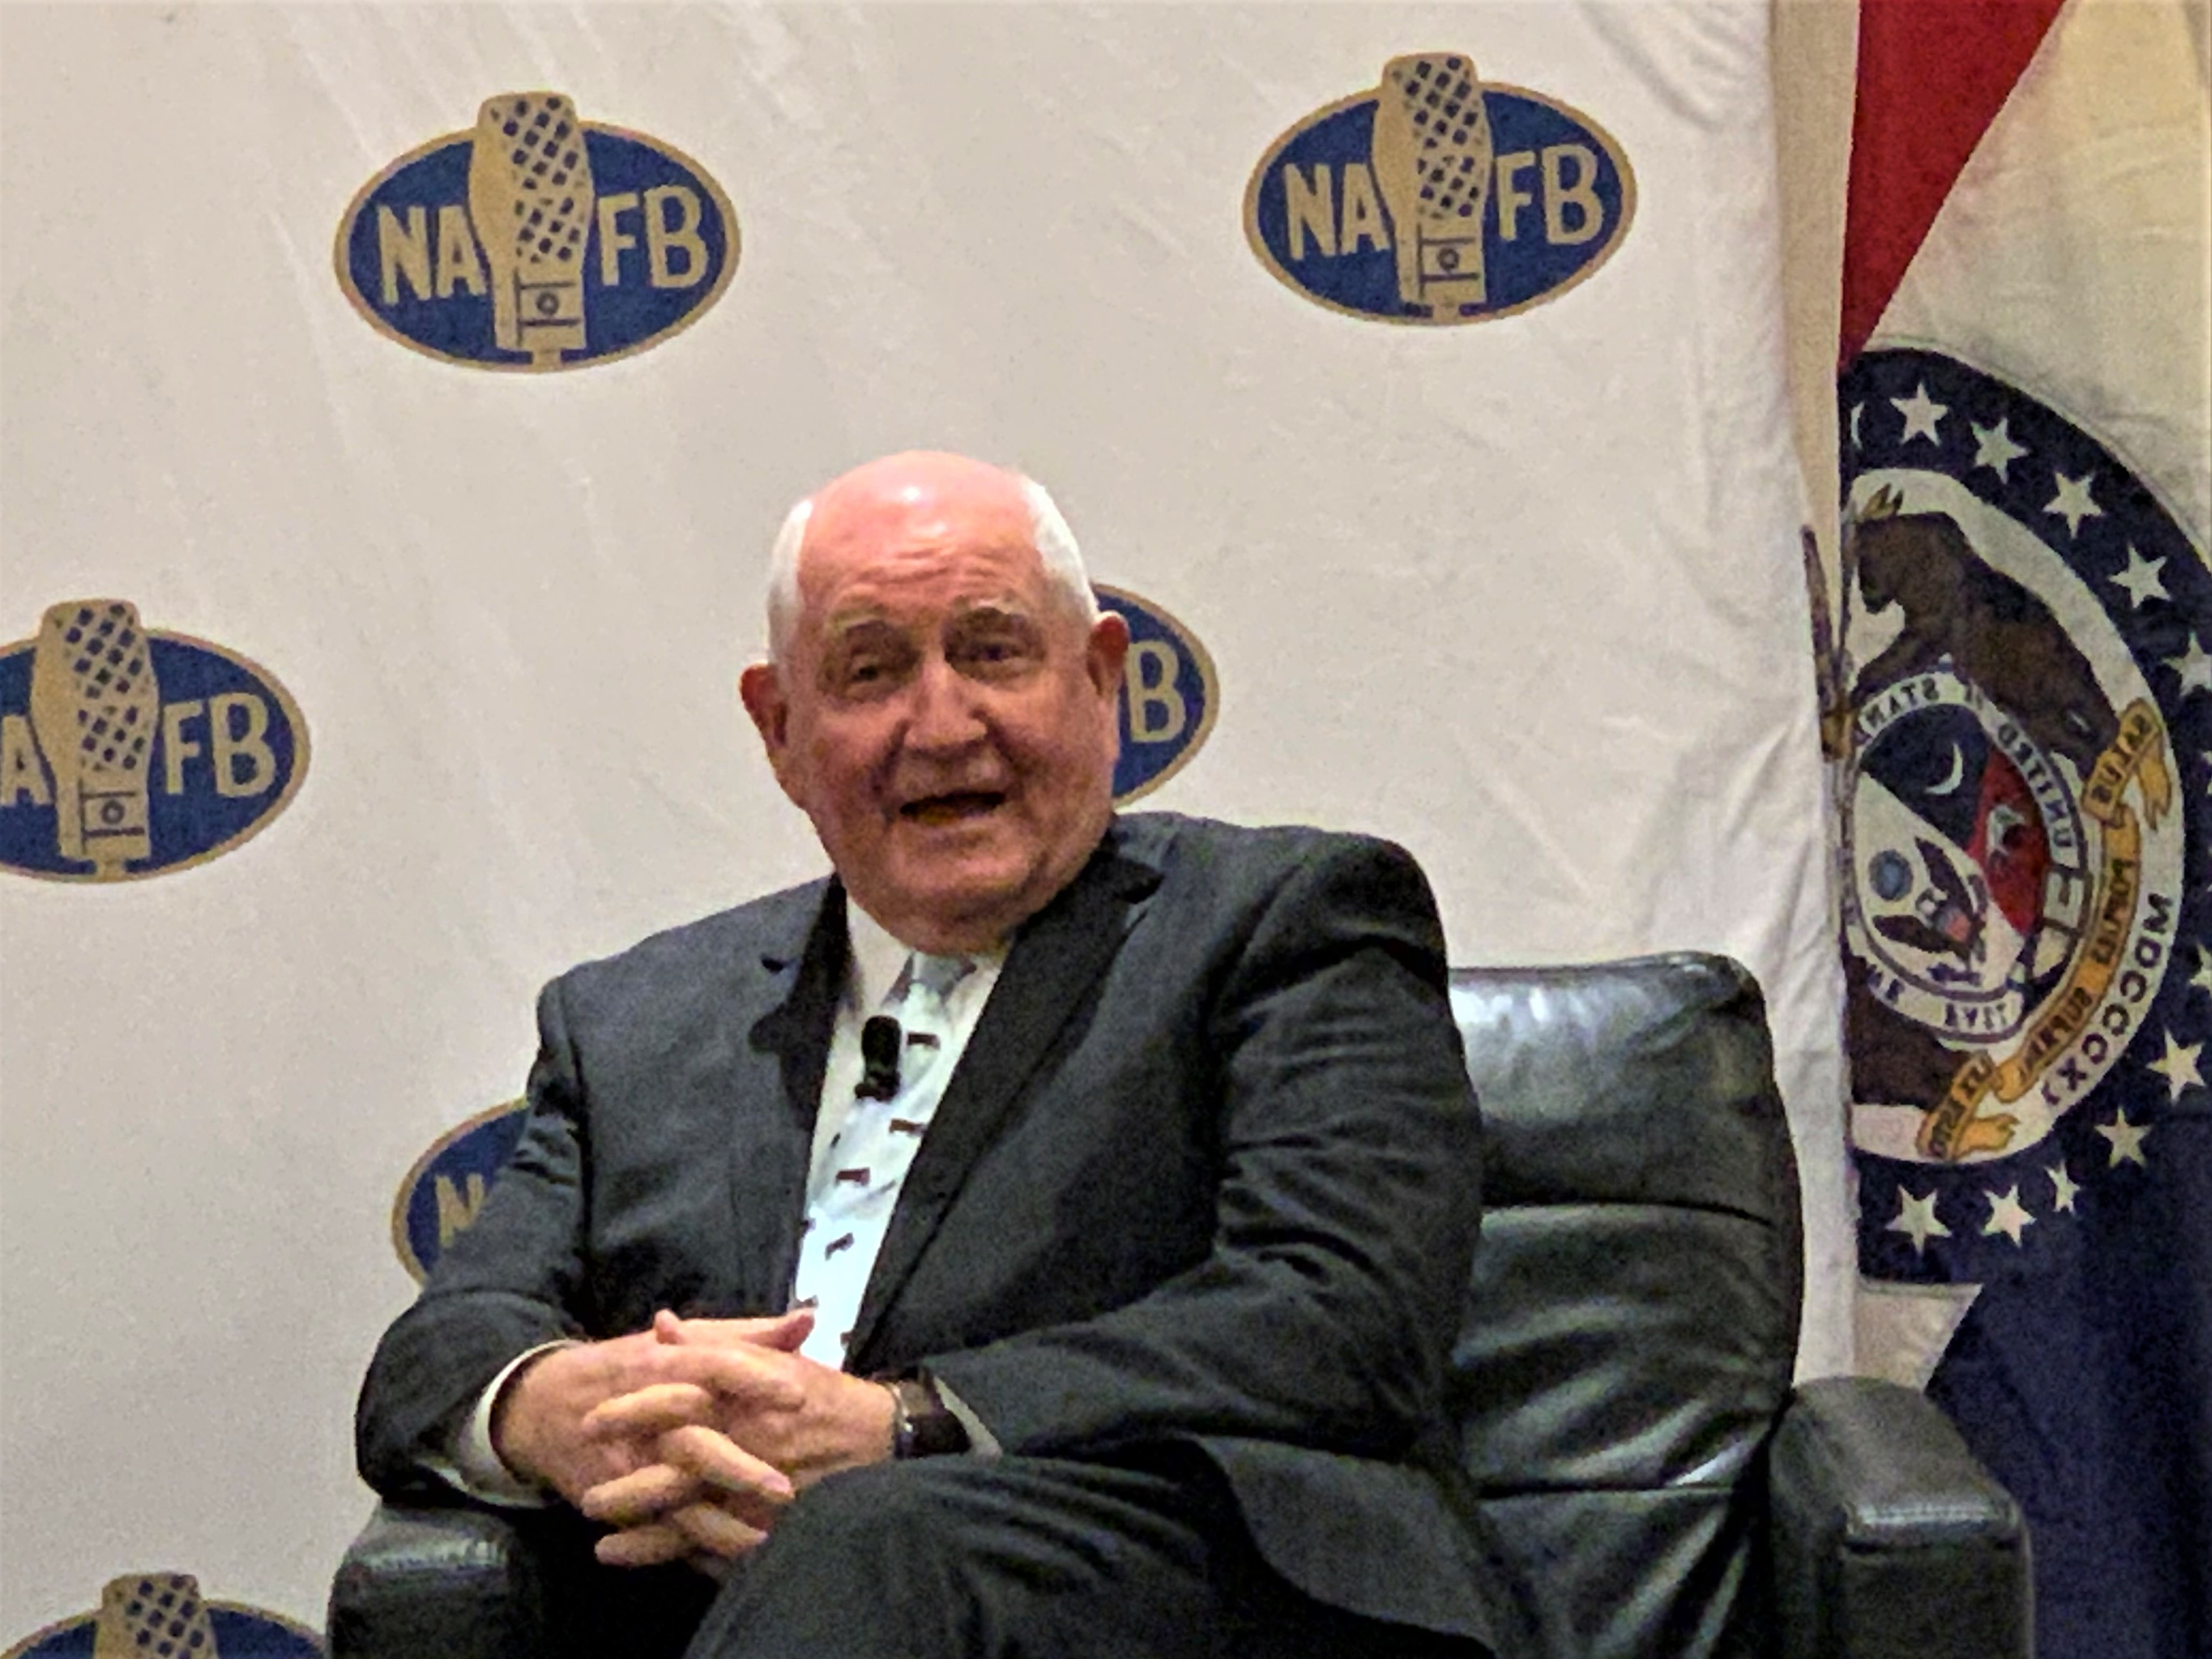 USDA Secretary Sonny Perdue Talks Latest MFP Payments at 2019 NAFB Convention